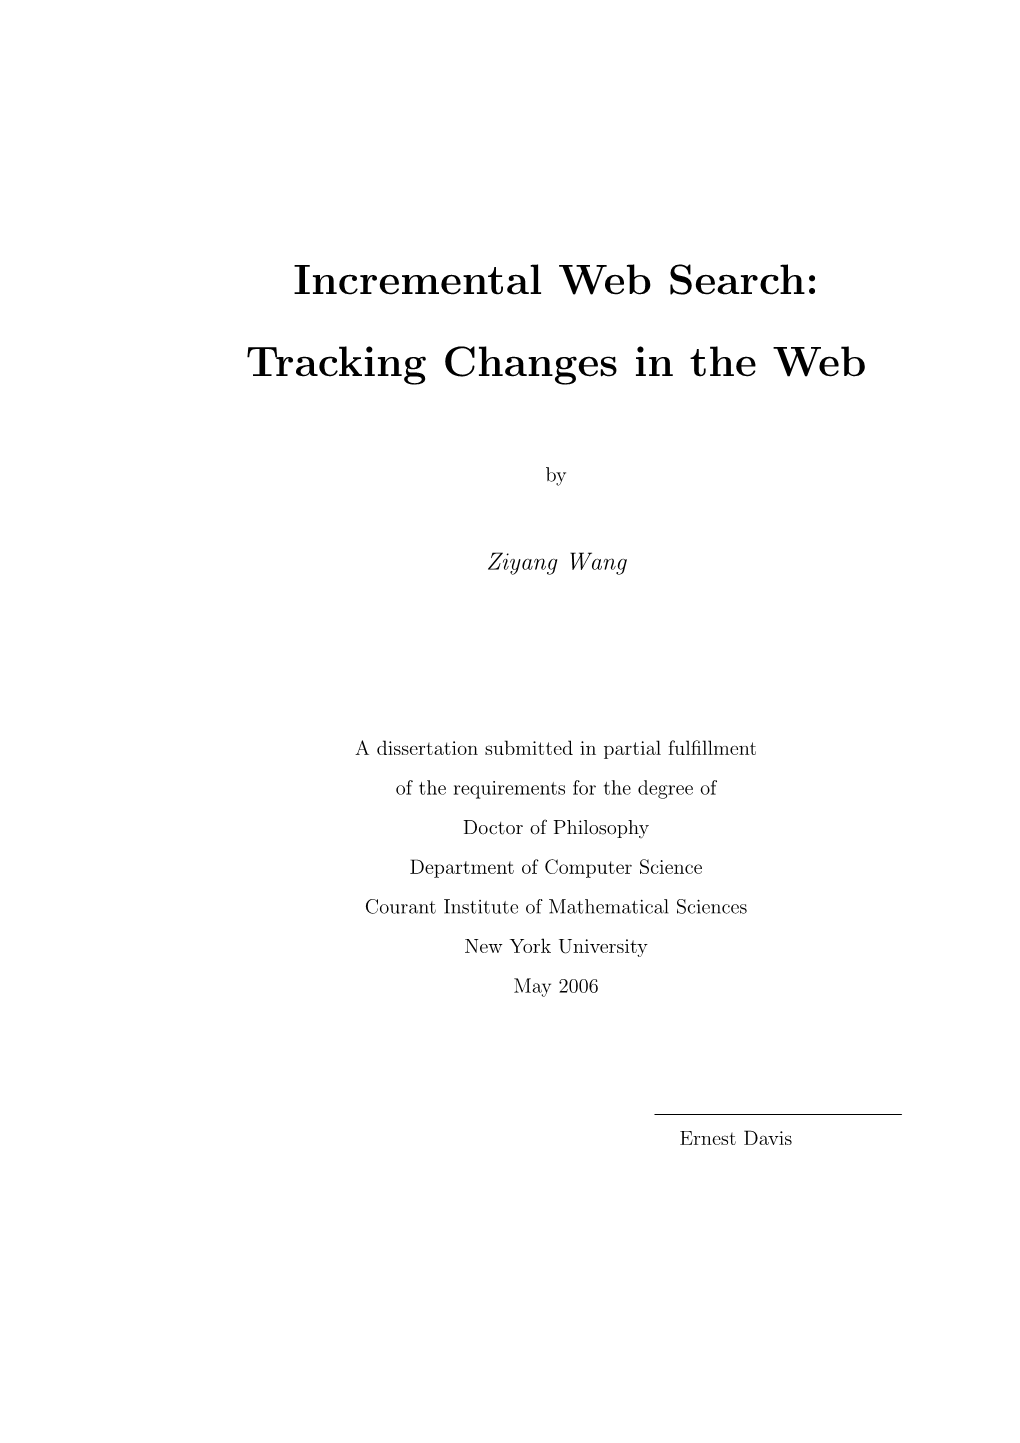 Tracking Changes in the Web